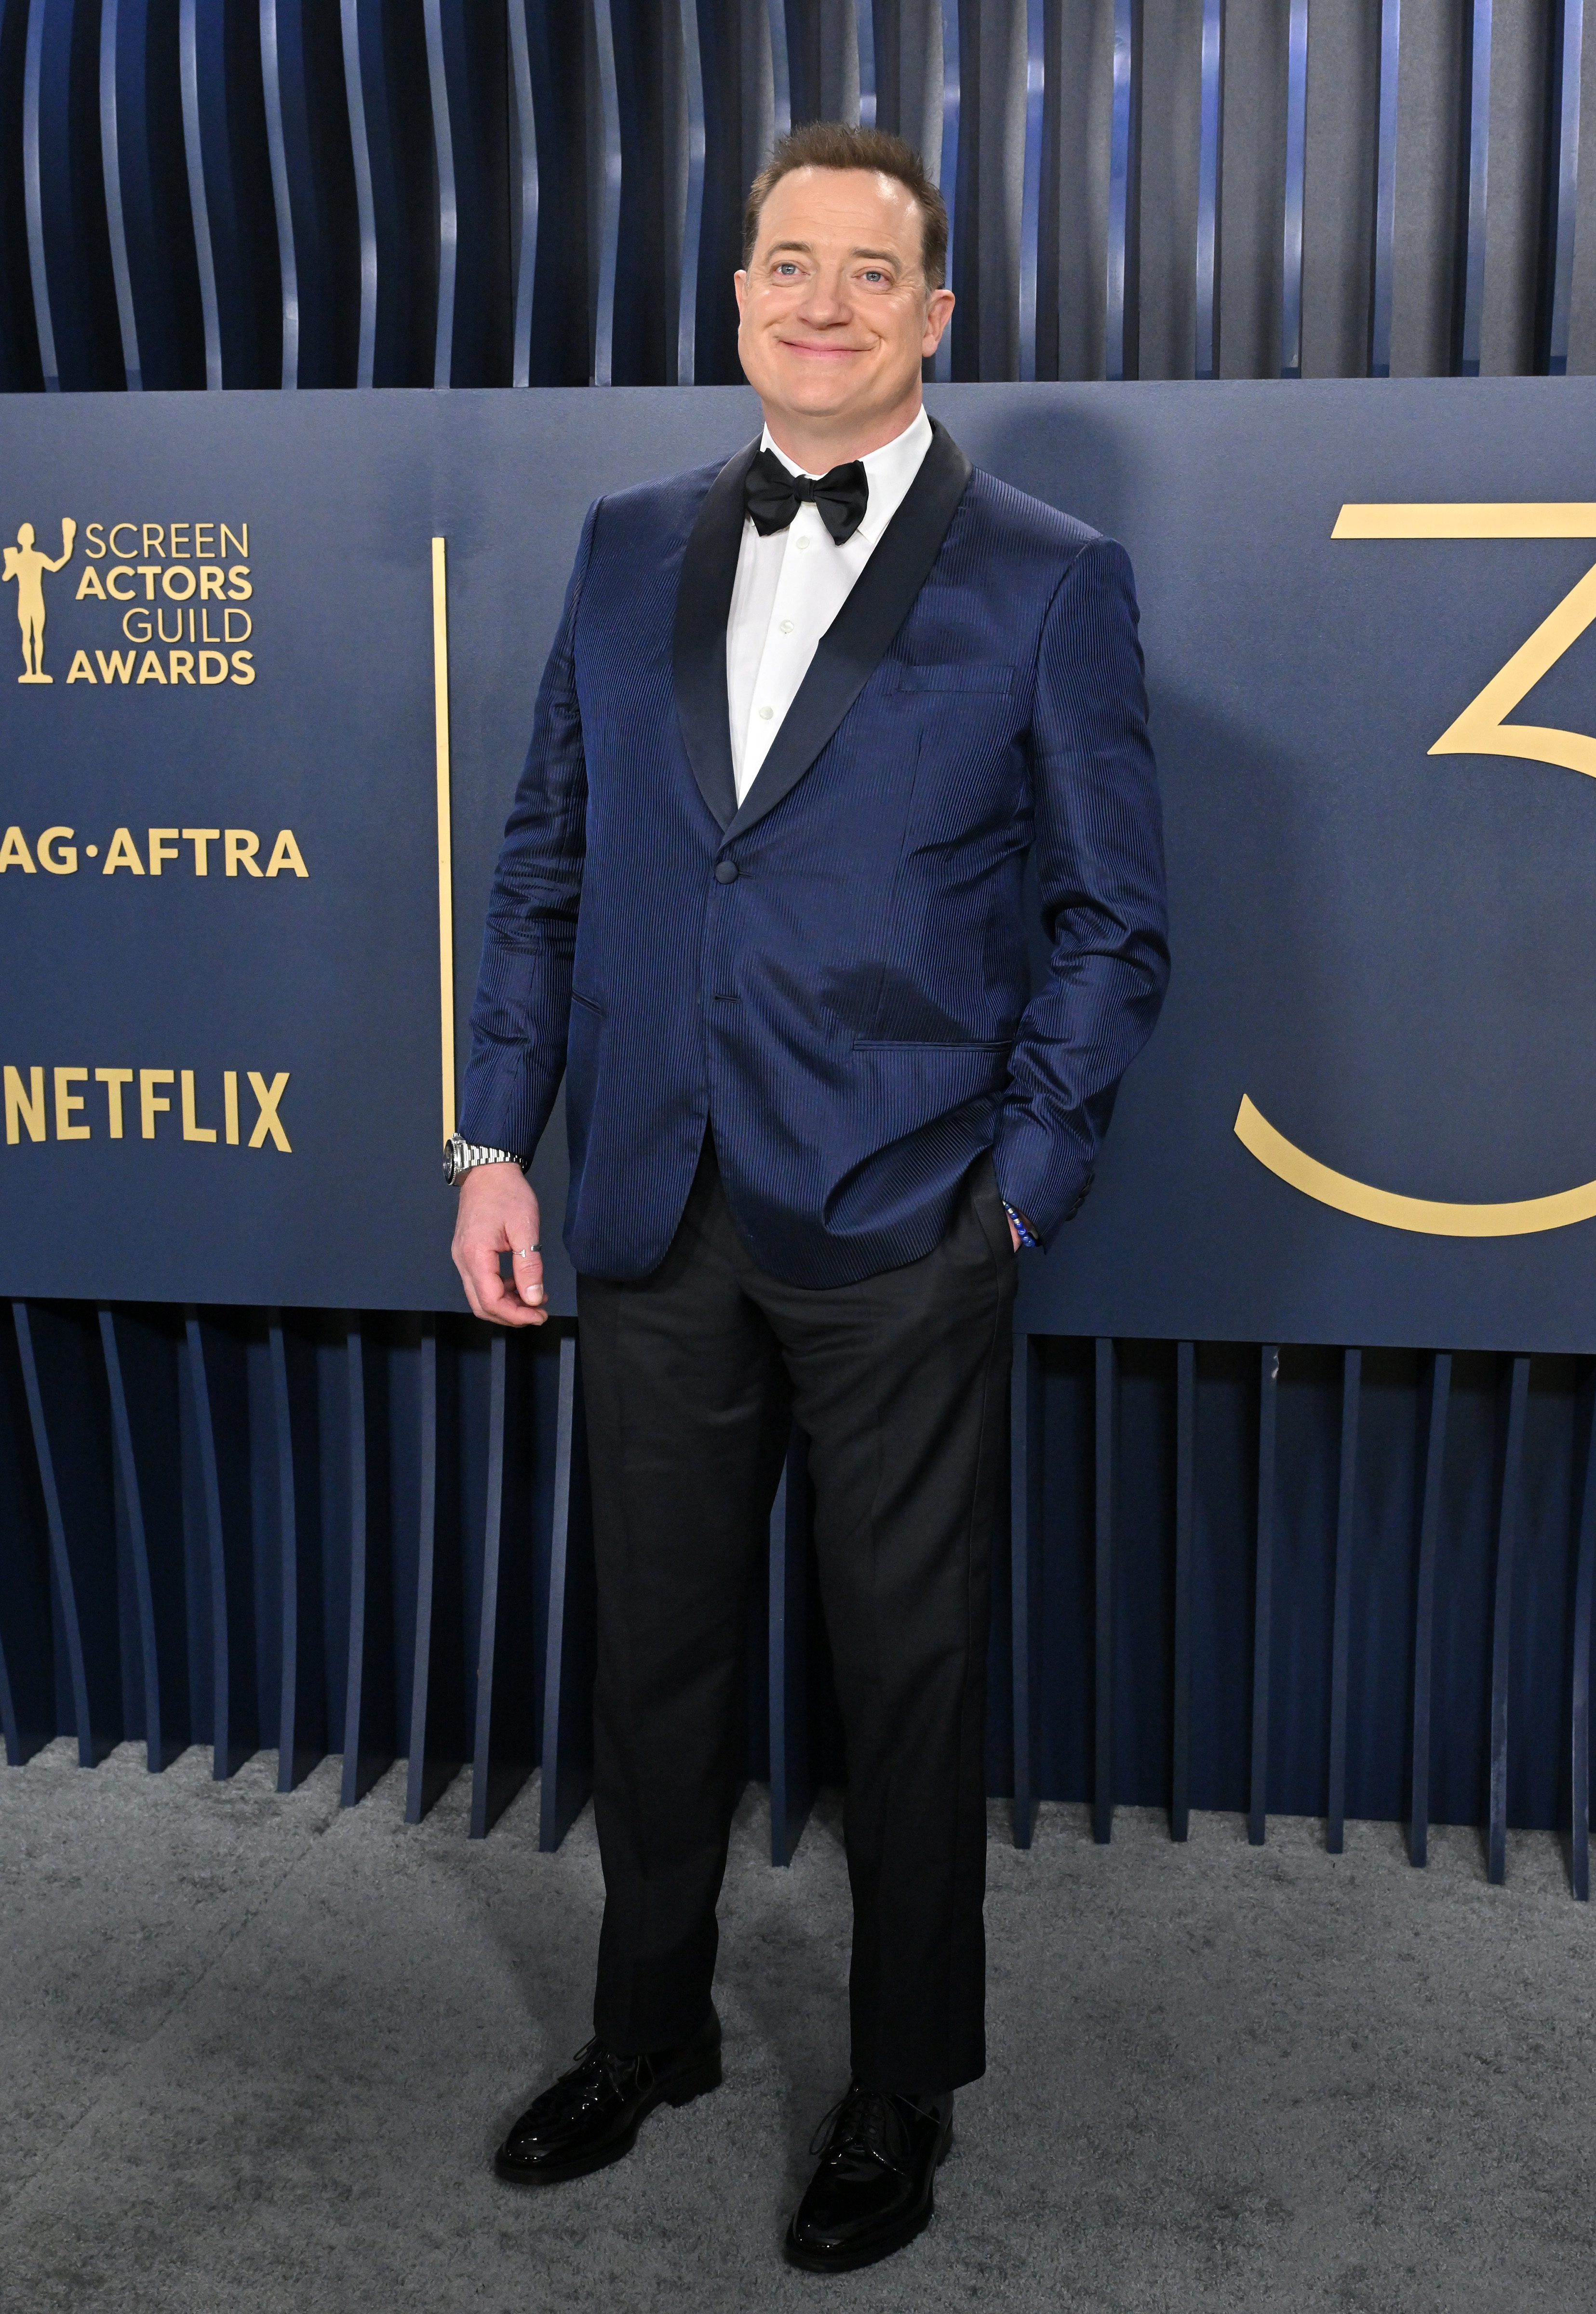 Brendan in a textured suit and bow tie standing against event backdrop